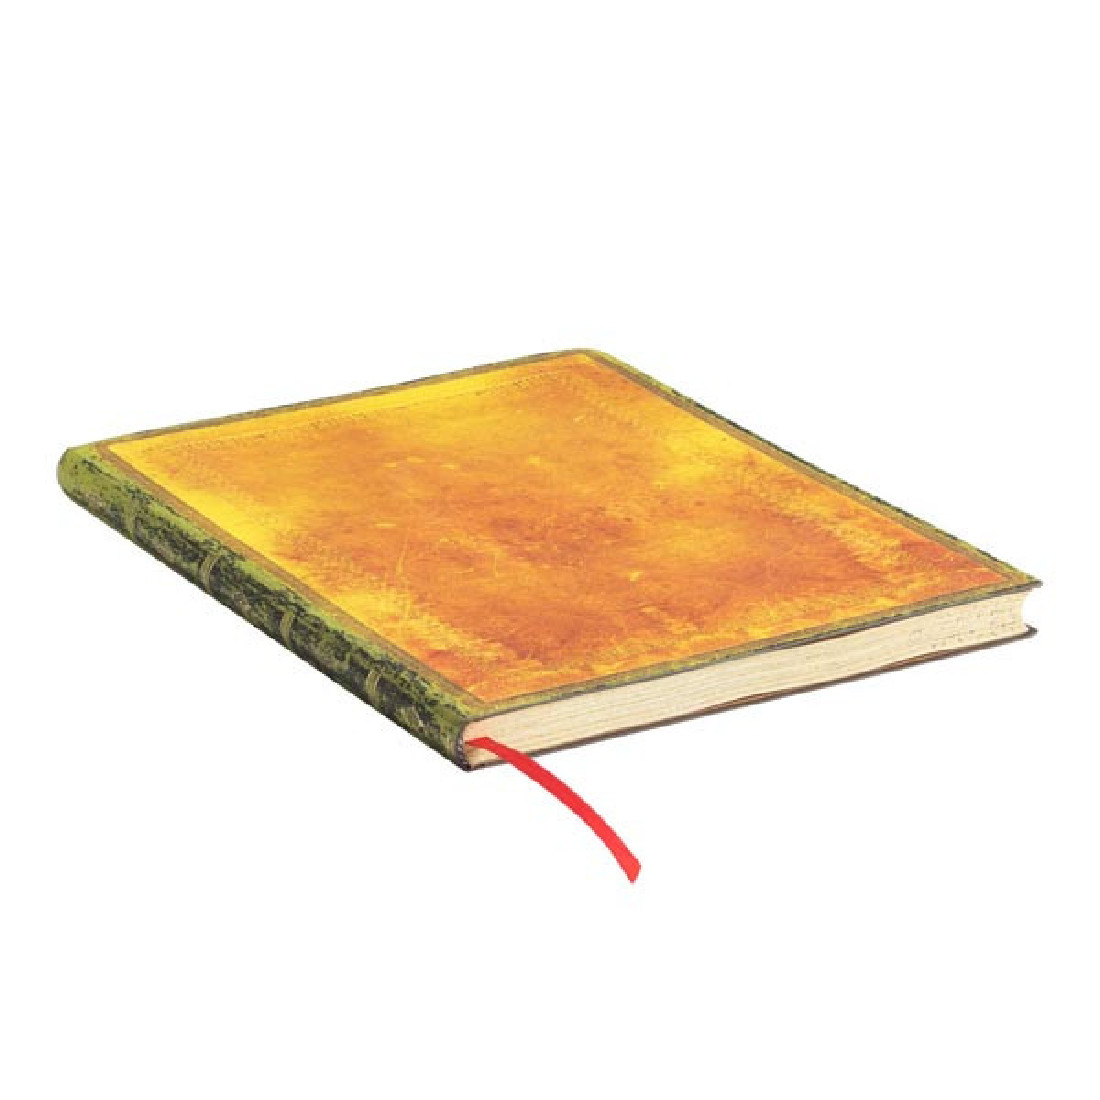 Notebook Flexi Ultra 23x18 (176 pages) Lined Ochre Paperblanks